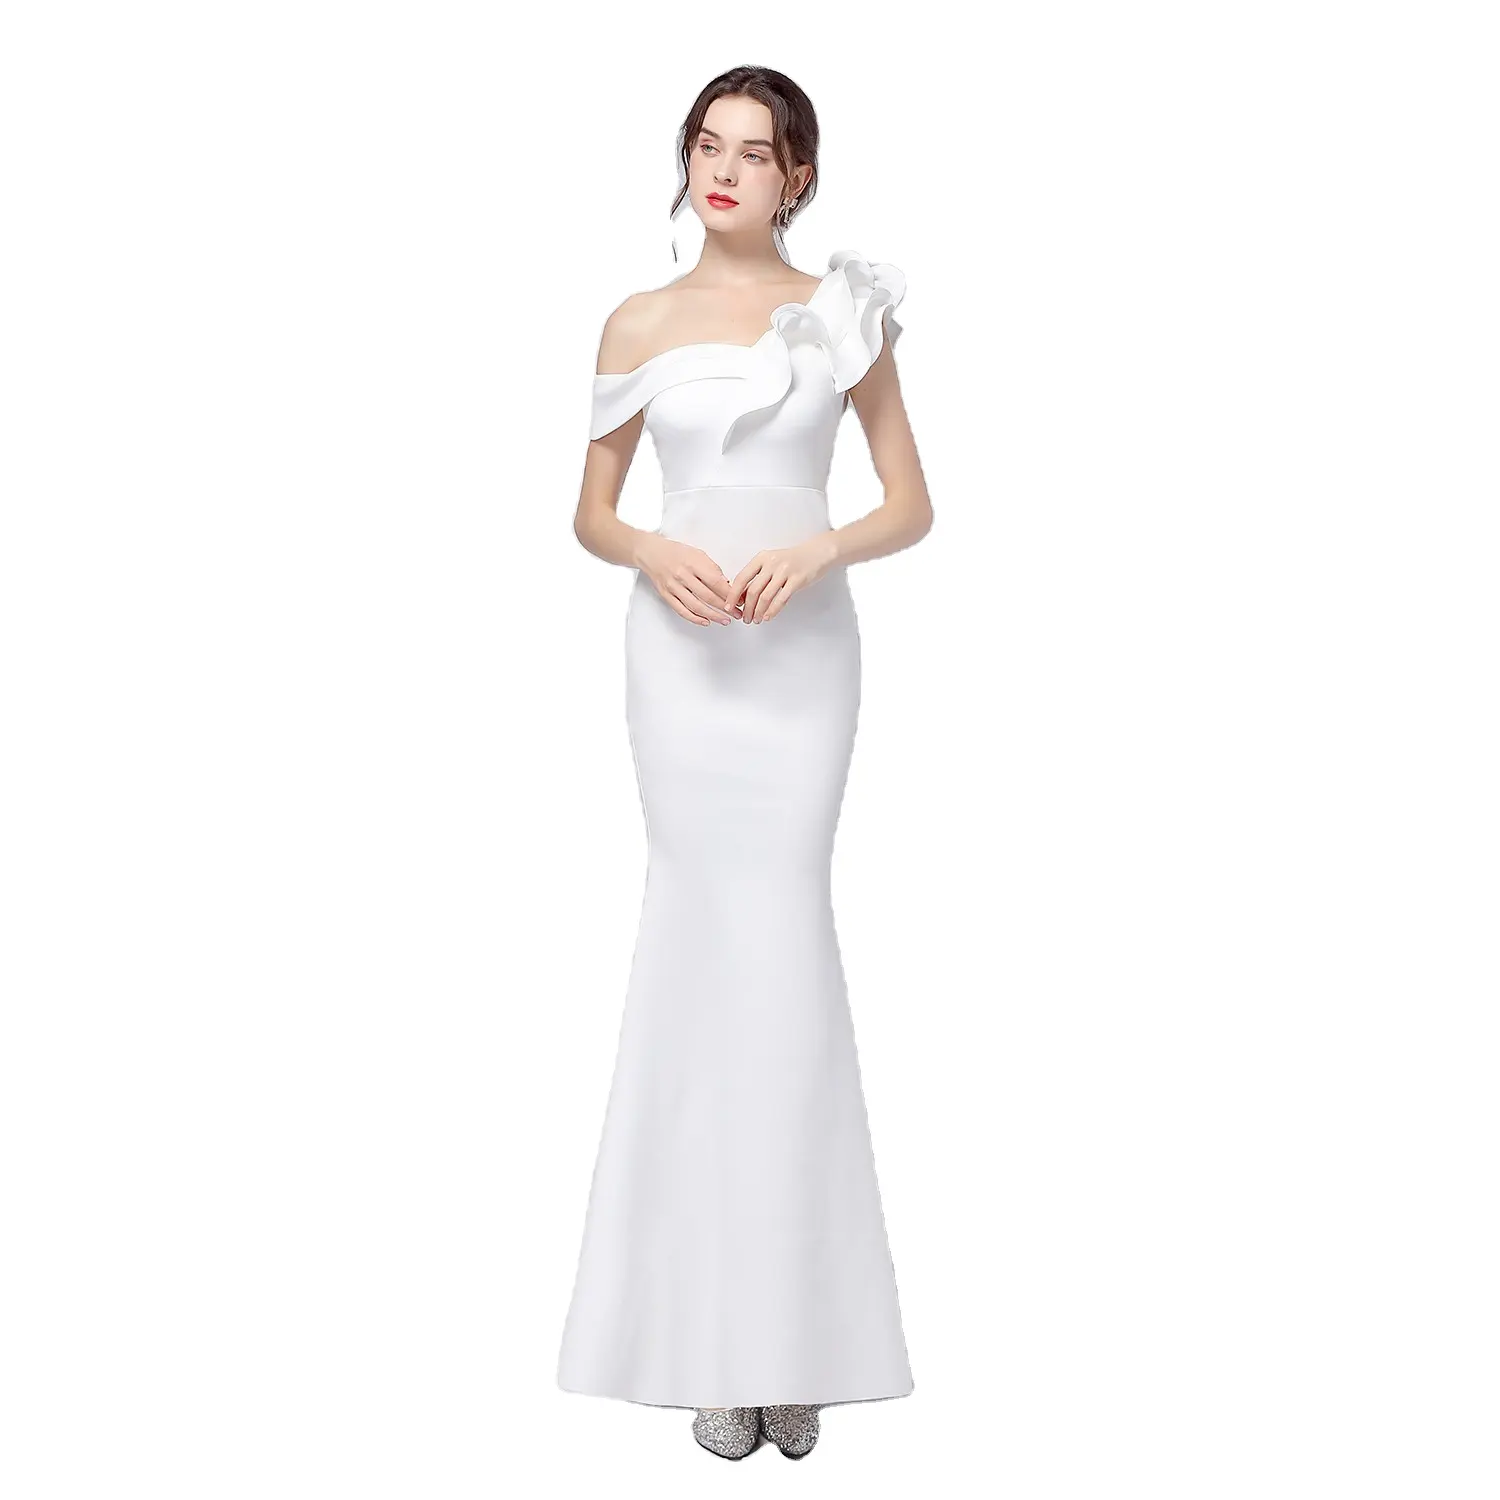 Luxury Dinner Gowns Wedding Dress Bridal Gown Evening Fabric White Fish Tail Evening Dresses Women Long